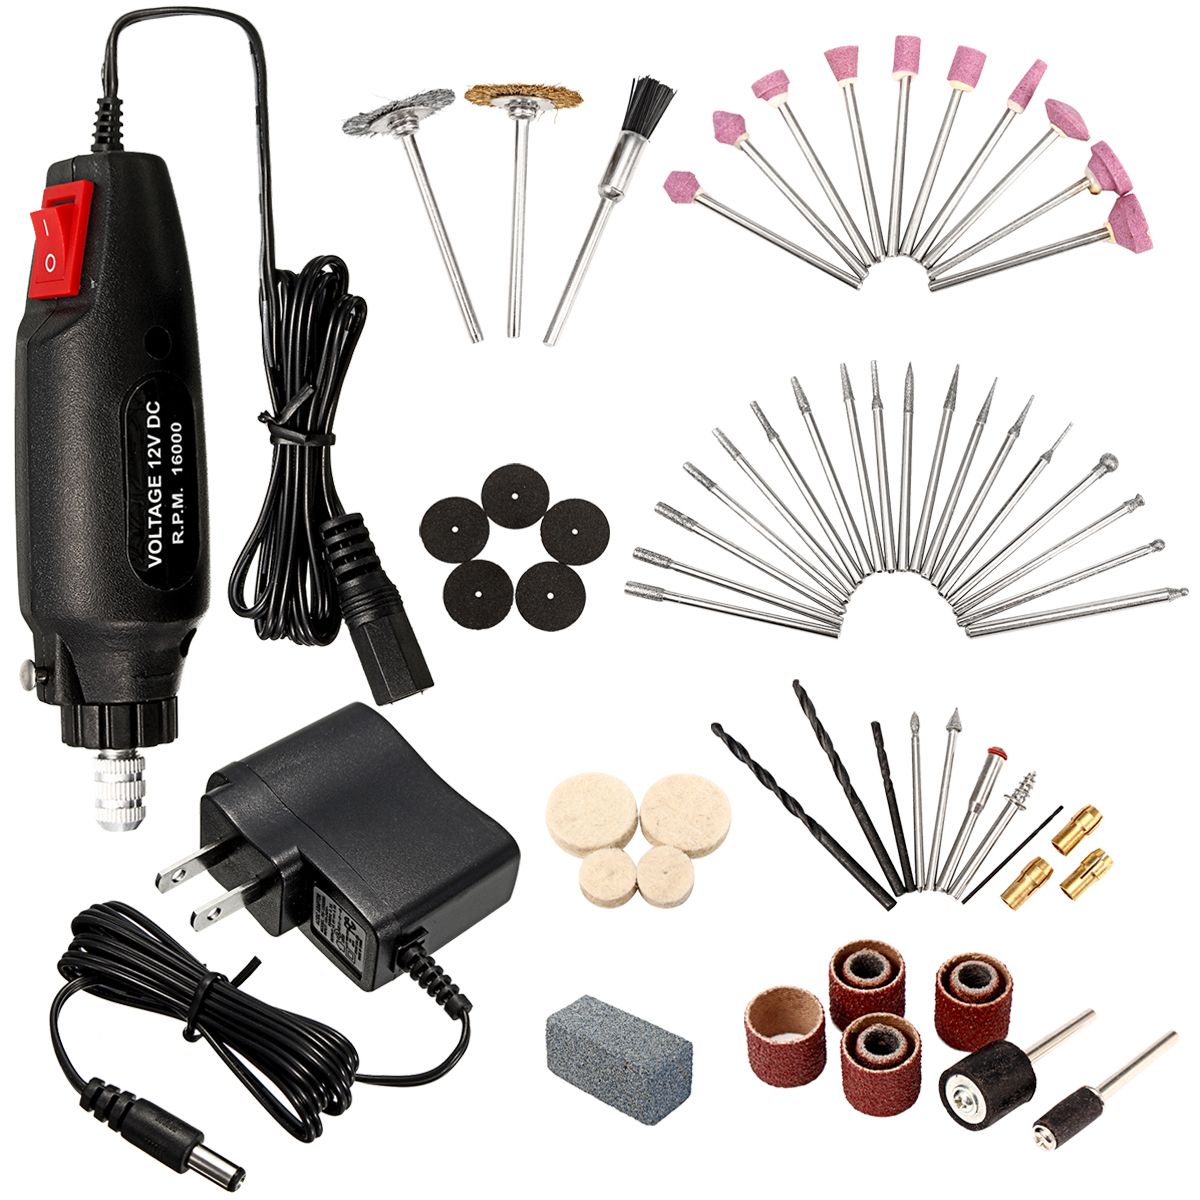 60Pcs-Electric-Polishing-Grinder-Rotary-Tool-Kit-12V-Power-Drill-Machine-amp-Accessories-1332635